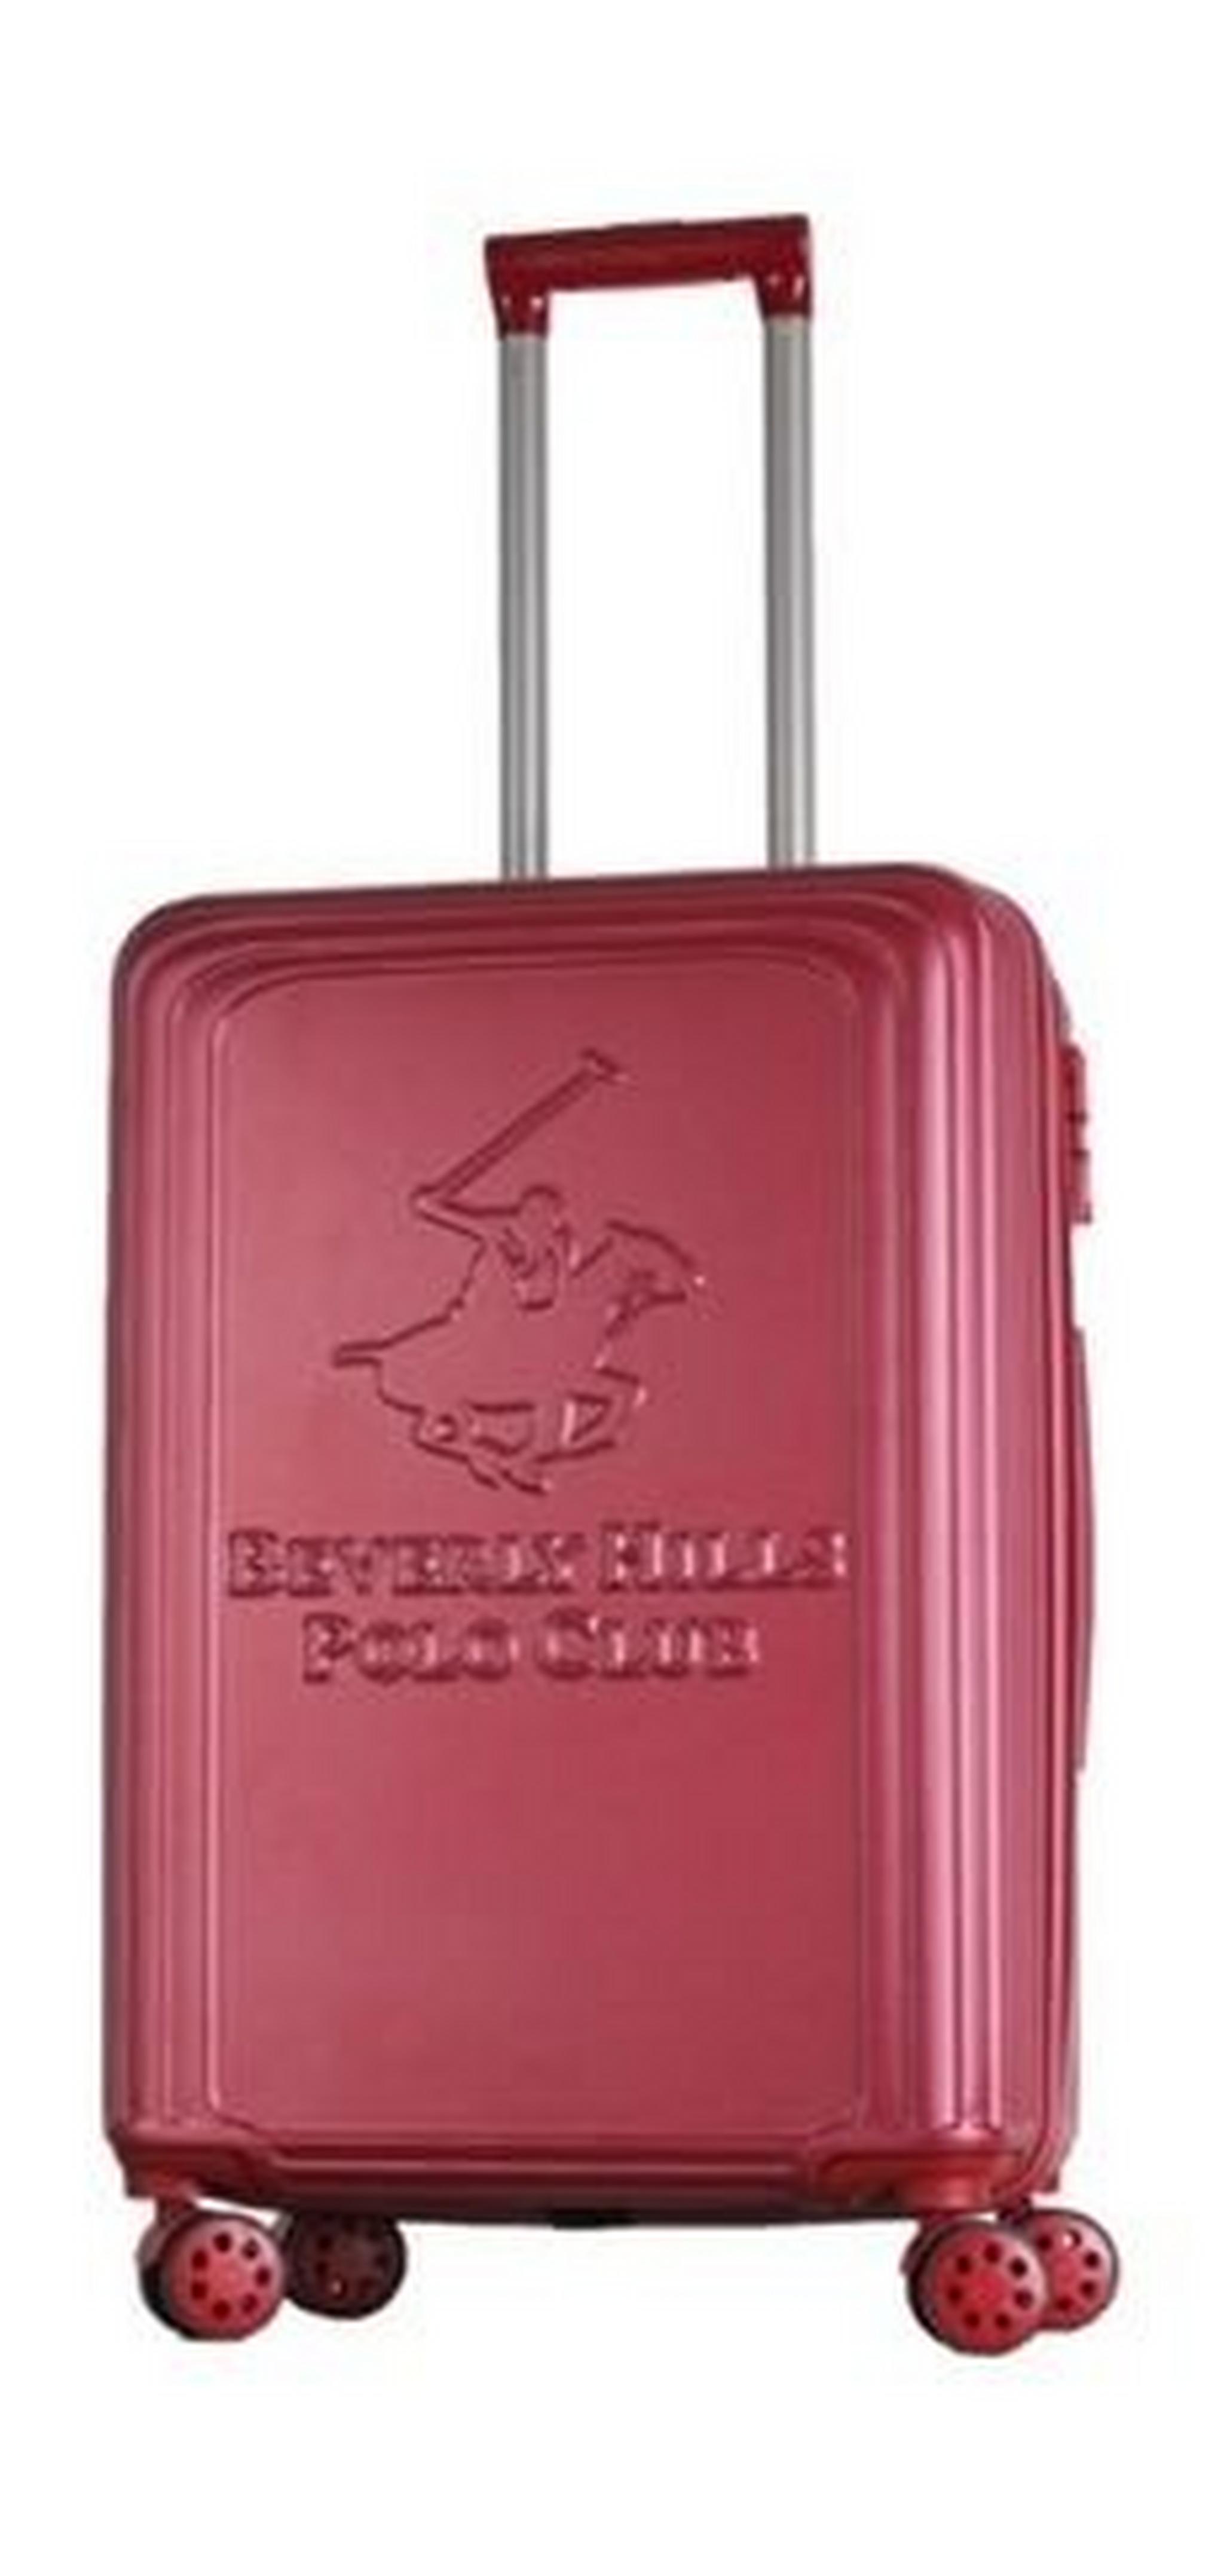 US POLO Paco Hard Trolley Luggage - Large/Red